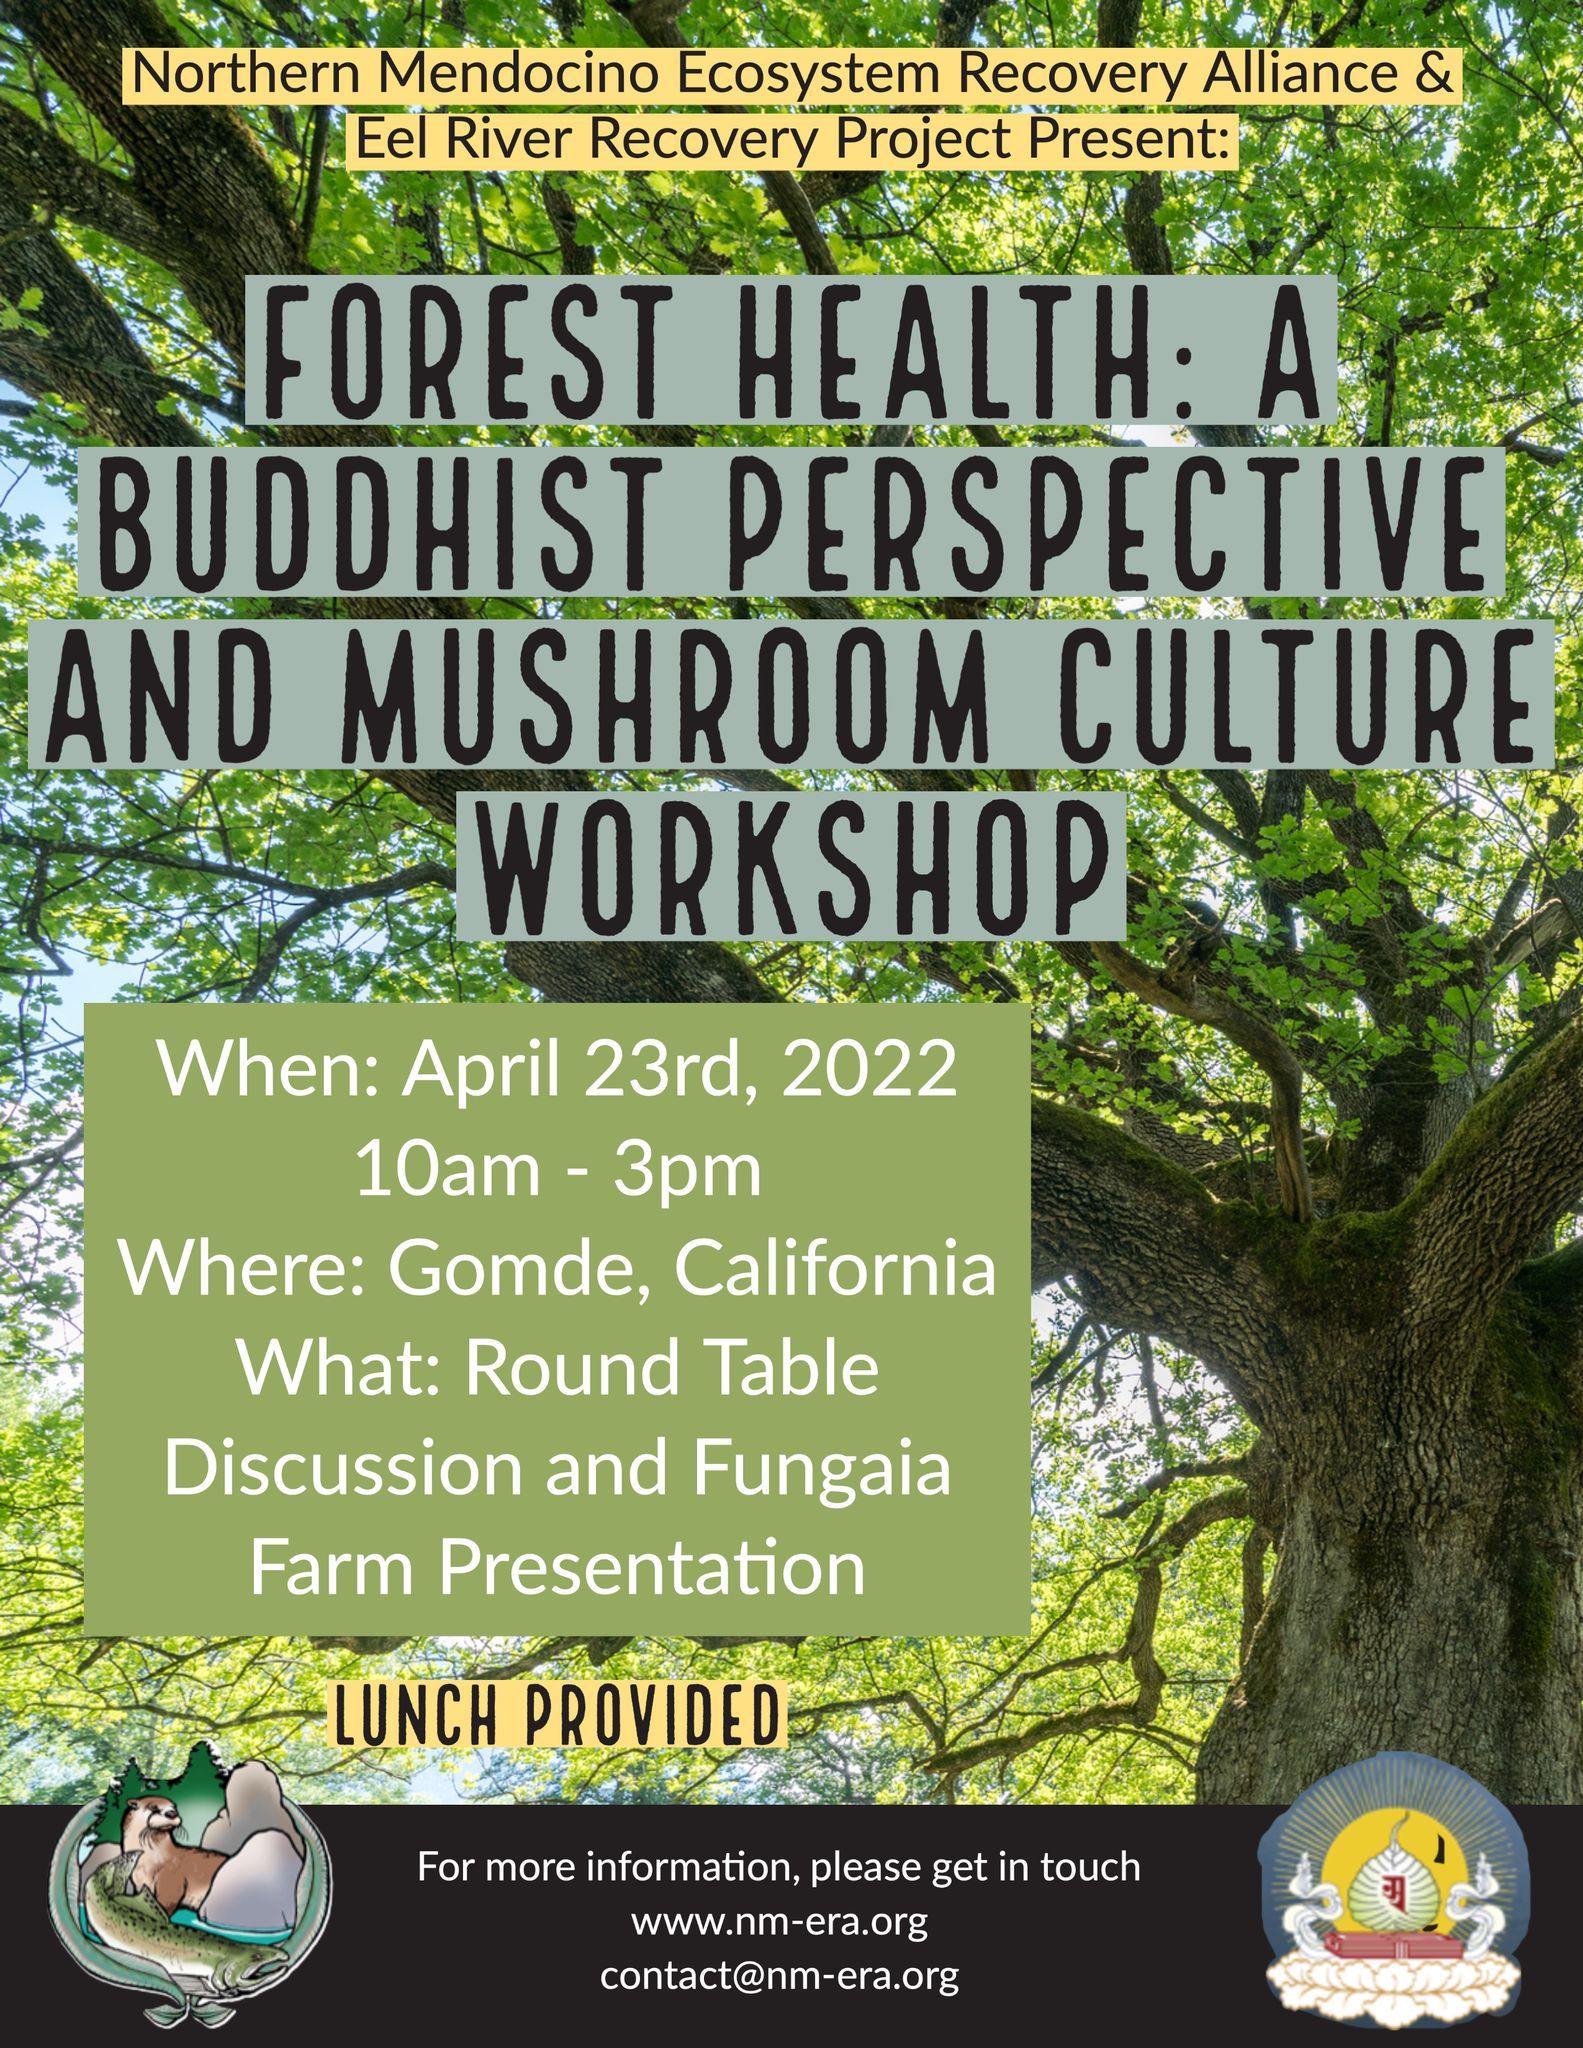 Next Up--Forest Health: A Buddhist Perspective and Mushroom Culture Workshop